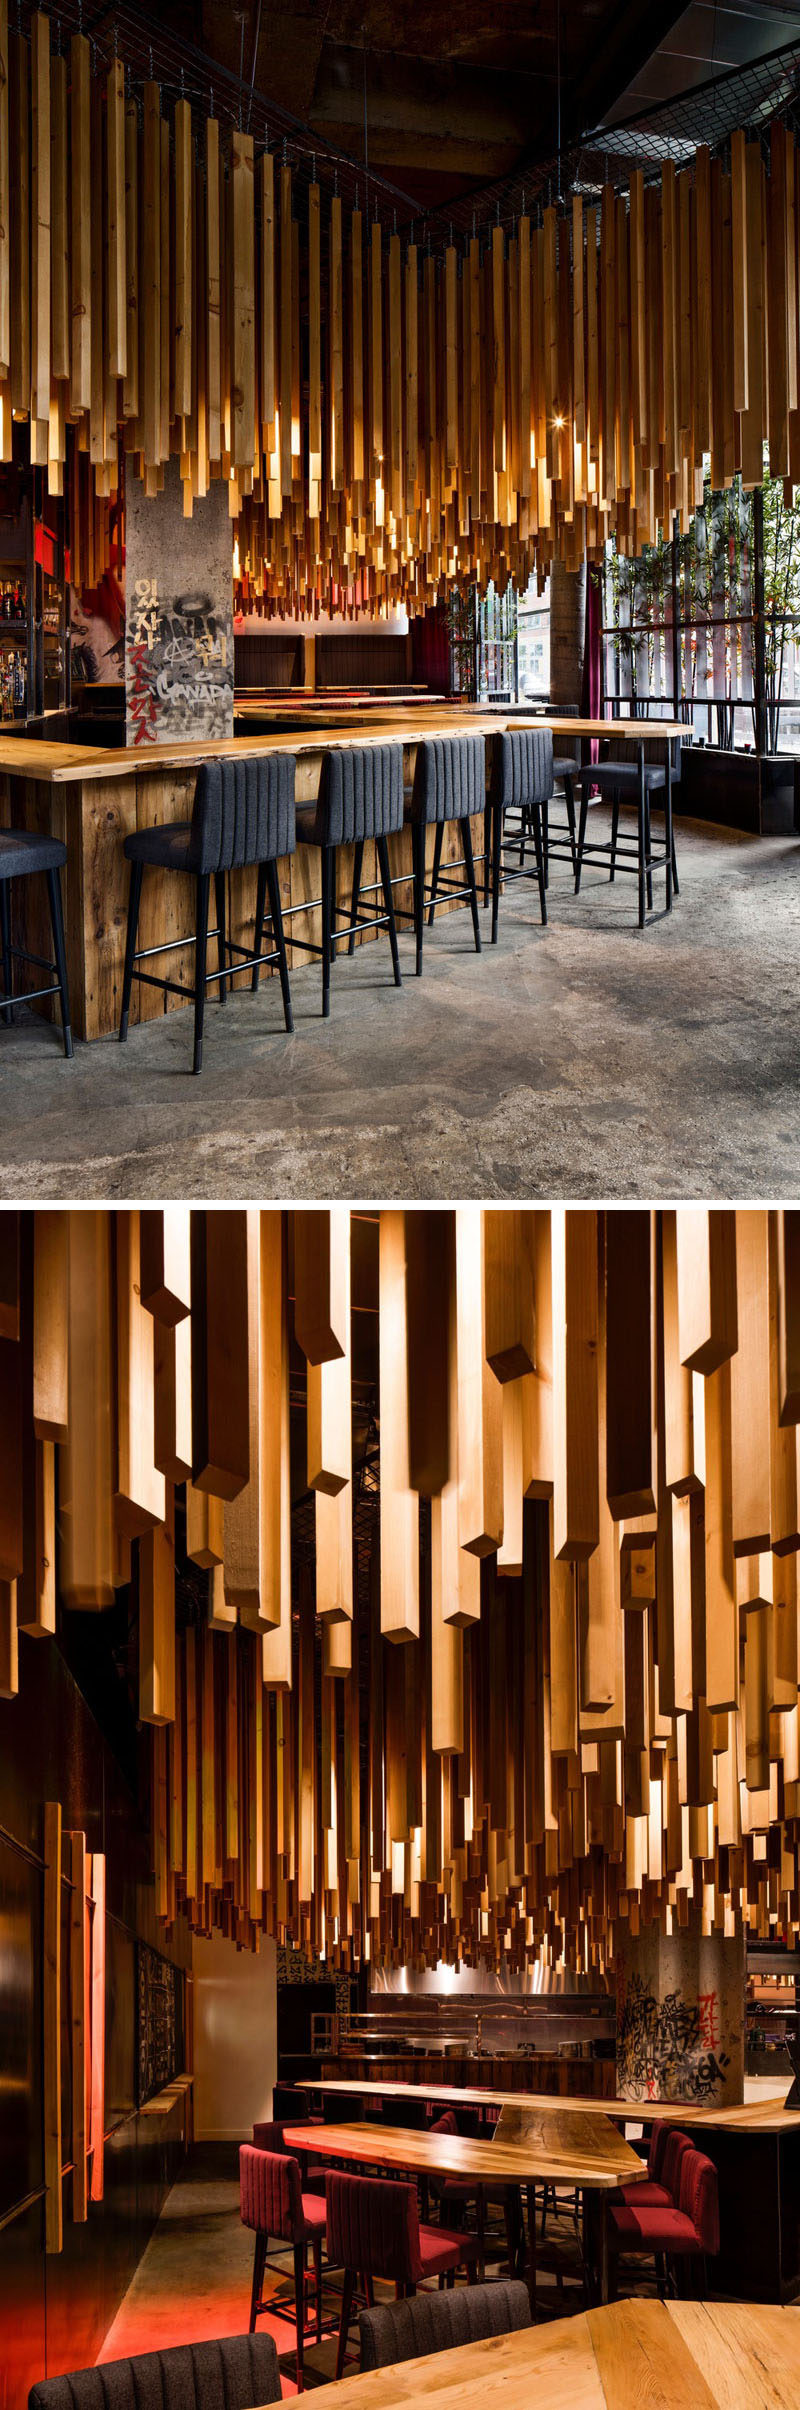 Design firm Jean de Lessard - Designers Créatifs have recently completed Ganadara, a new restaurant in Montreal, Canada, that features 2,700 wood lengths that hang from the ceiling. #RestaurantDesign #Wood #WoodCeiling #ModernRestaurant